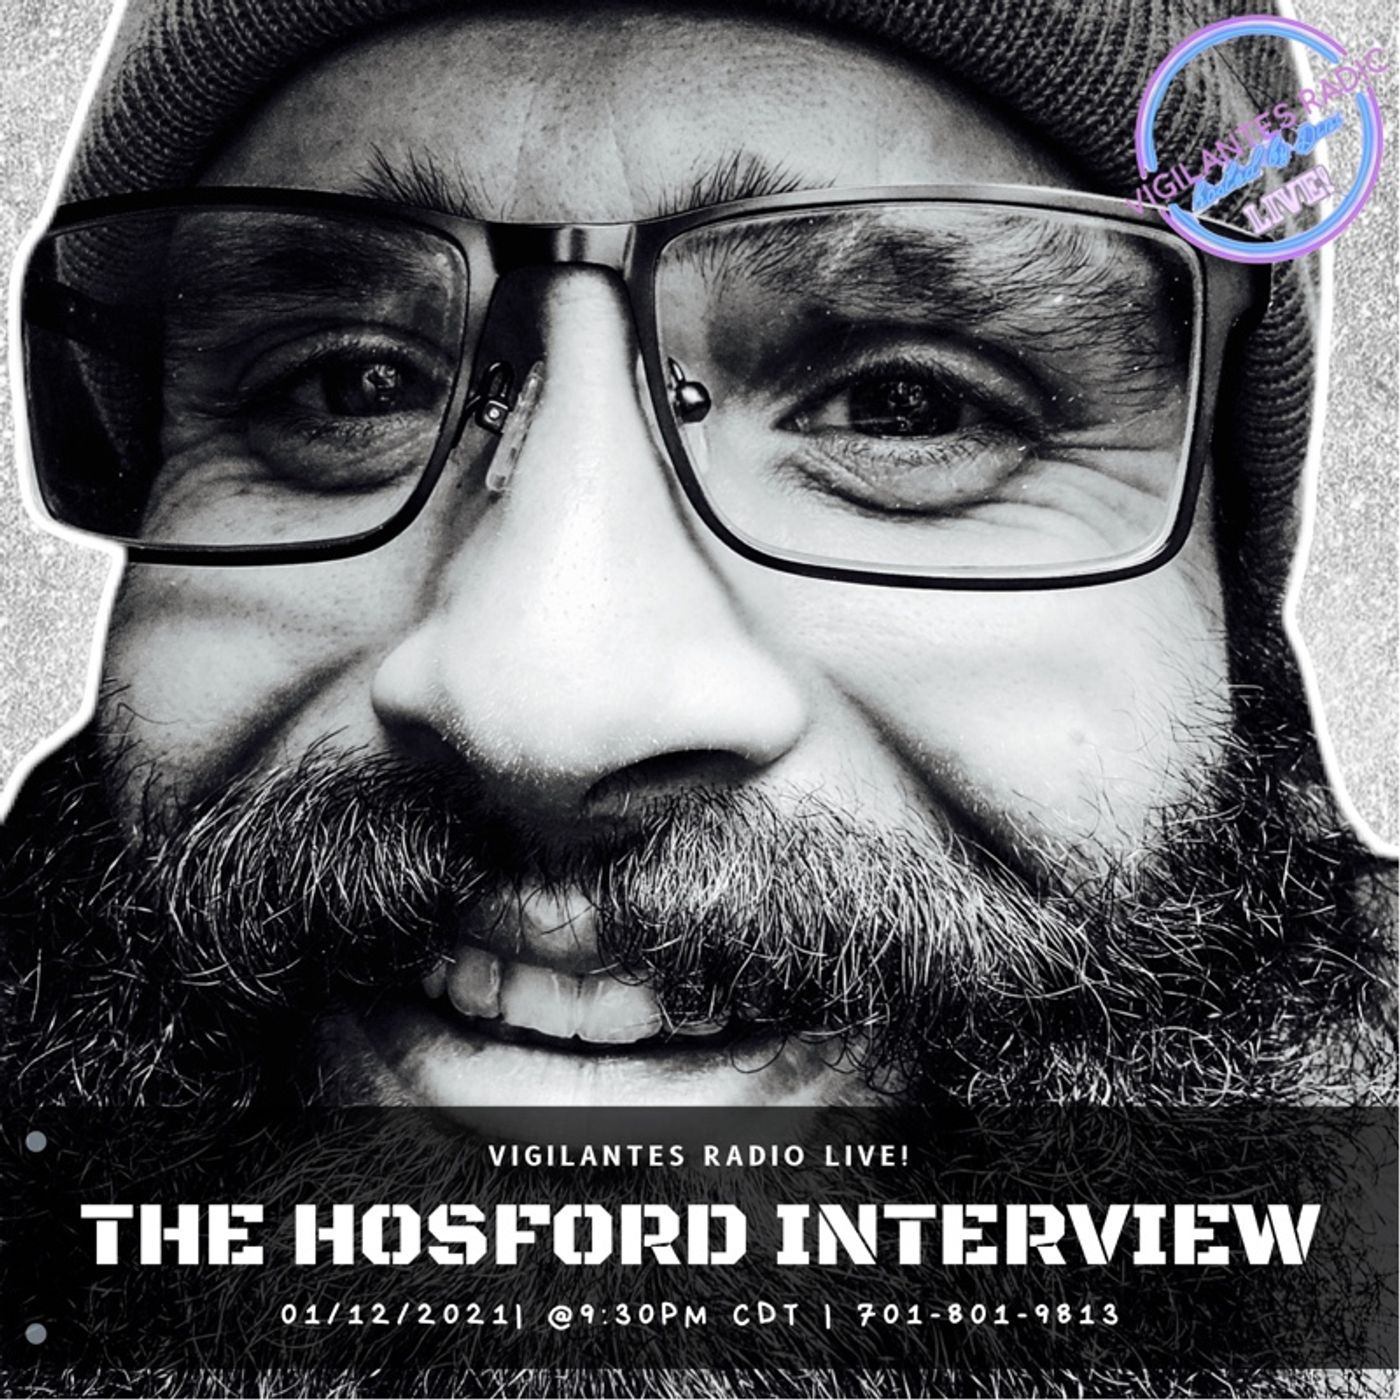 The Hosford Interview. Image